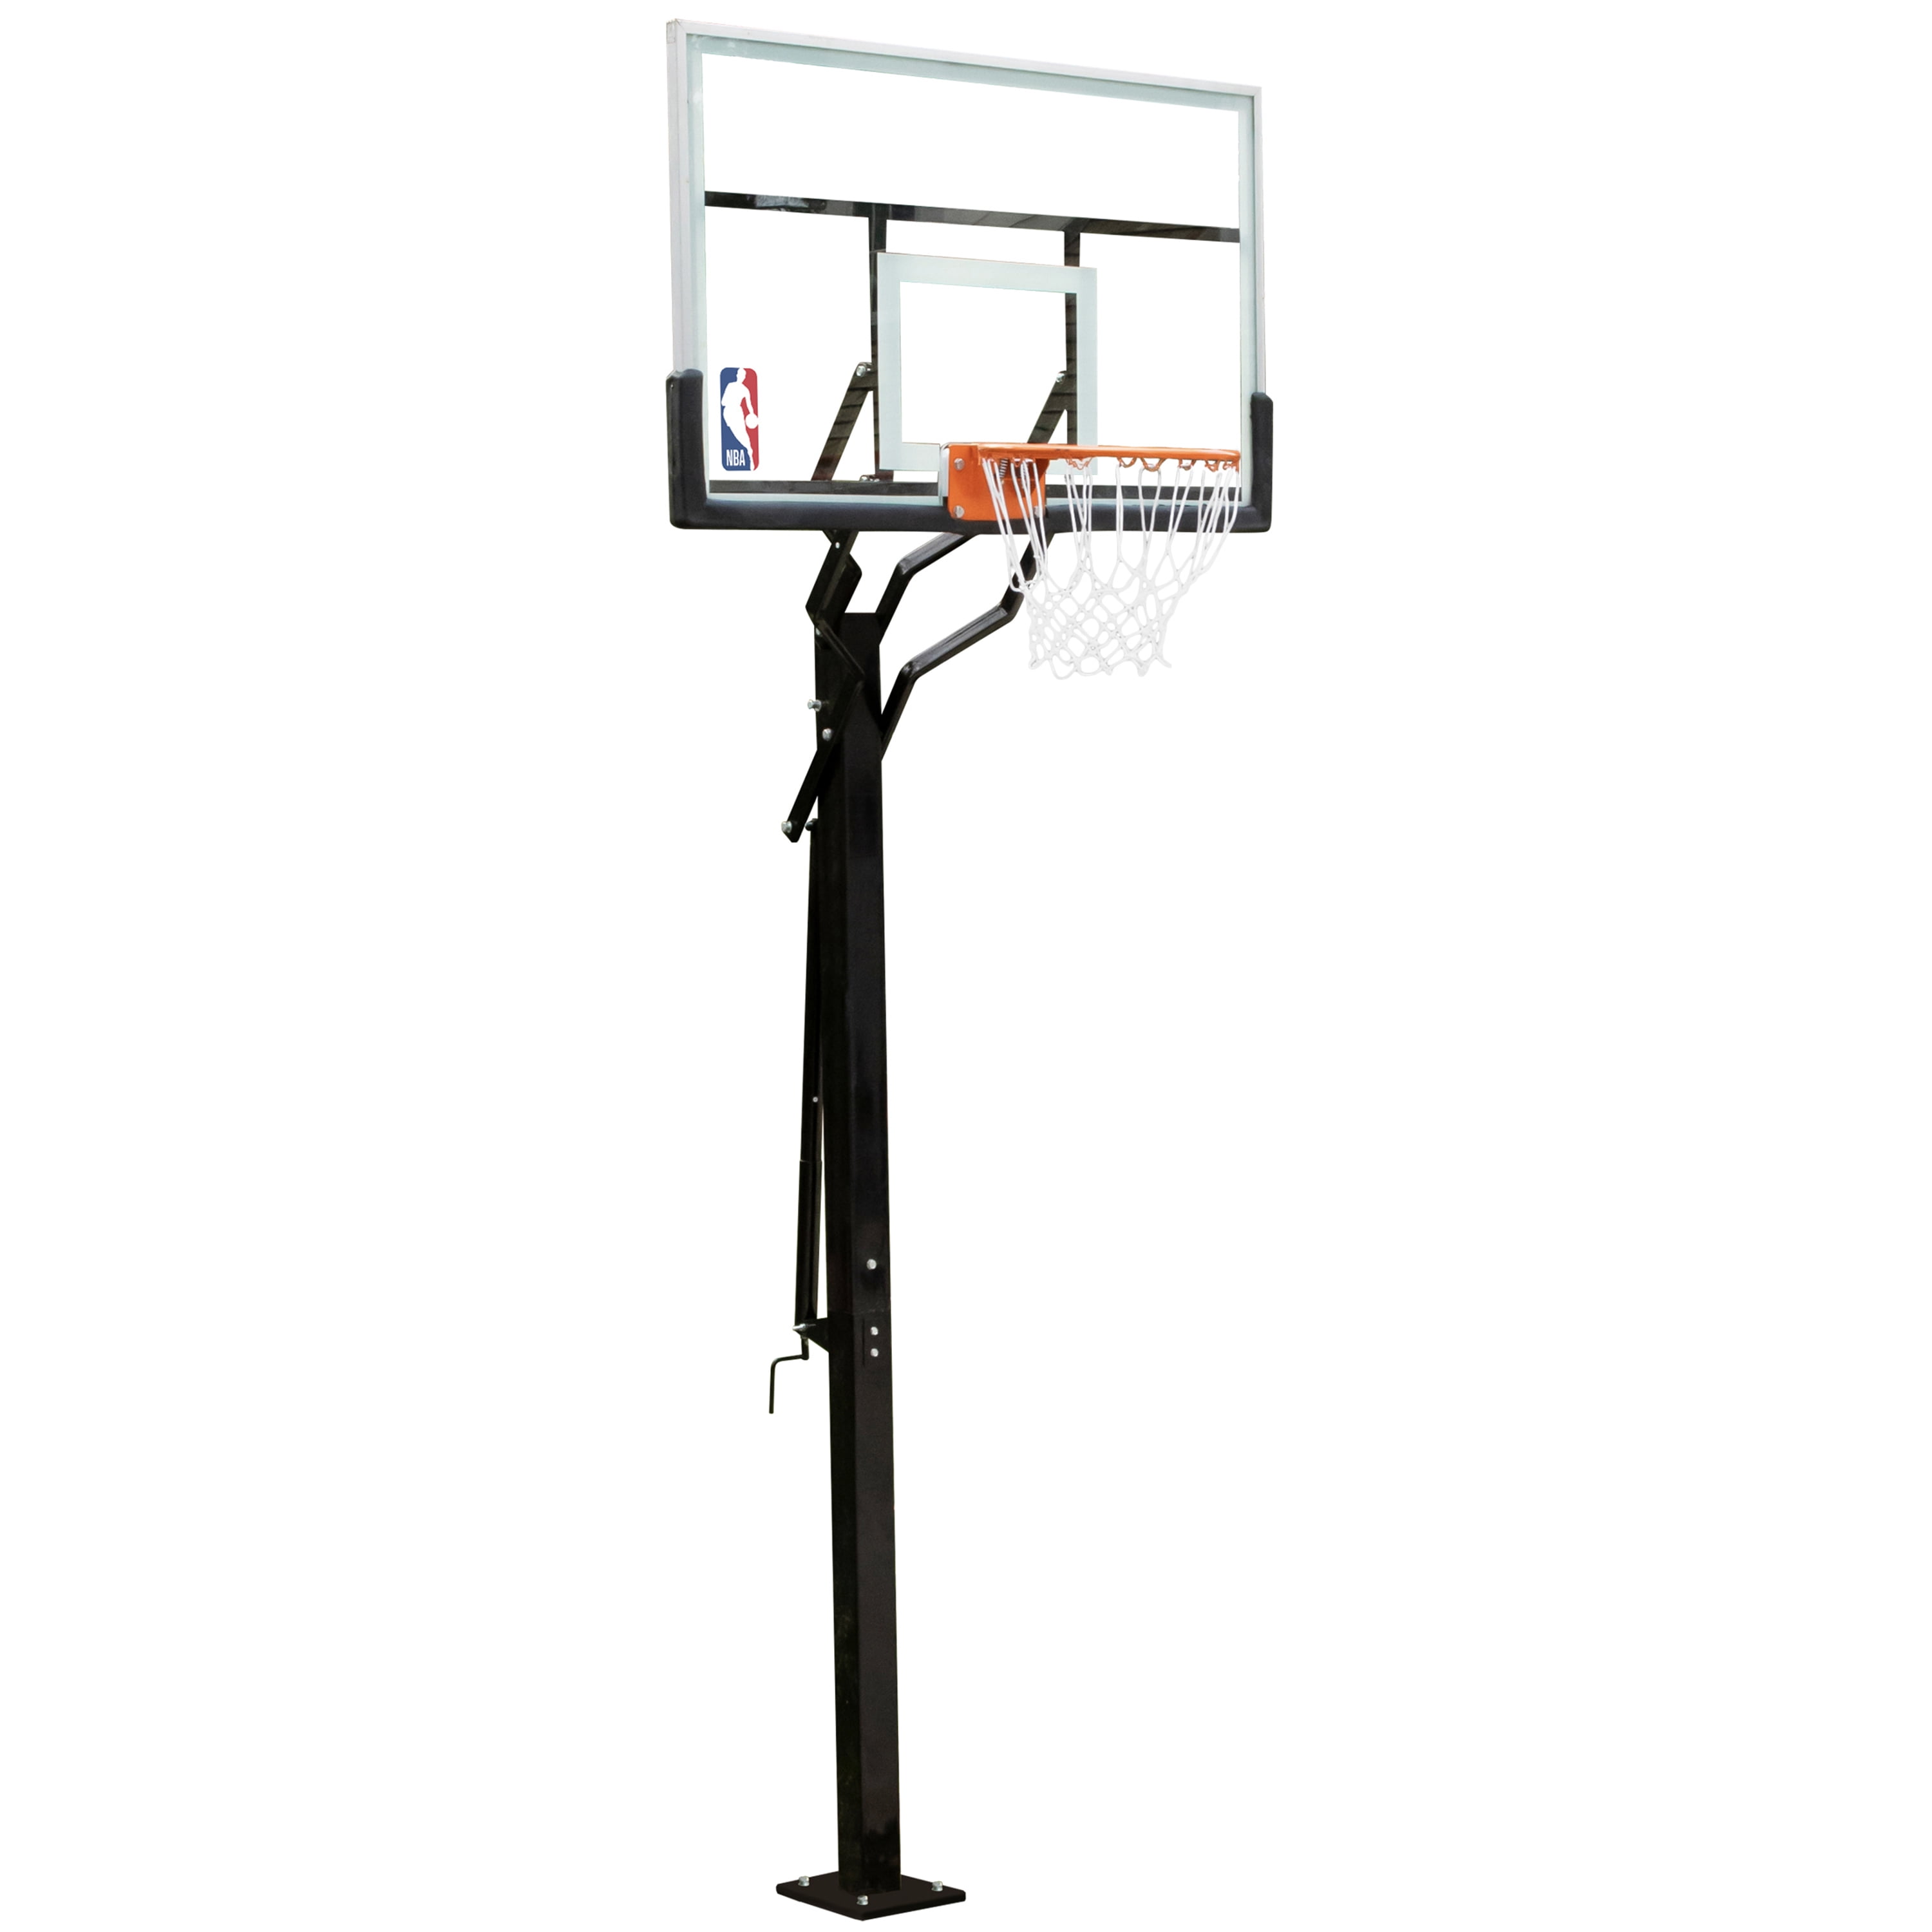 NBA 54″ Adjustable In-Ground Basketball Hoop with Tempered Glass Backboard